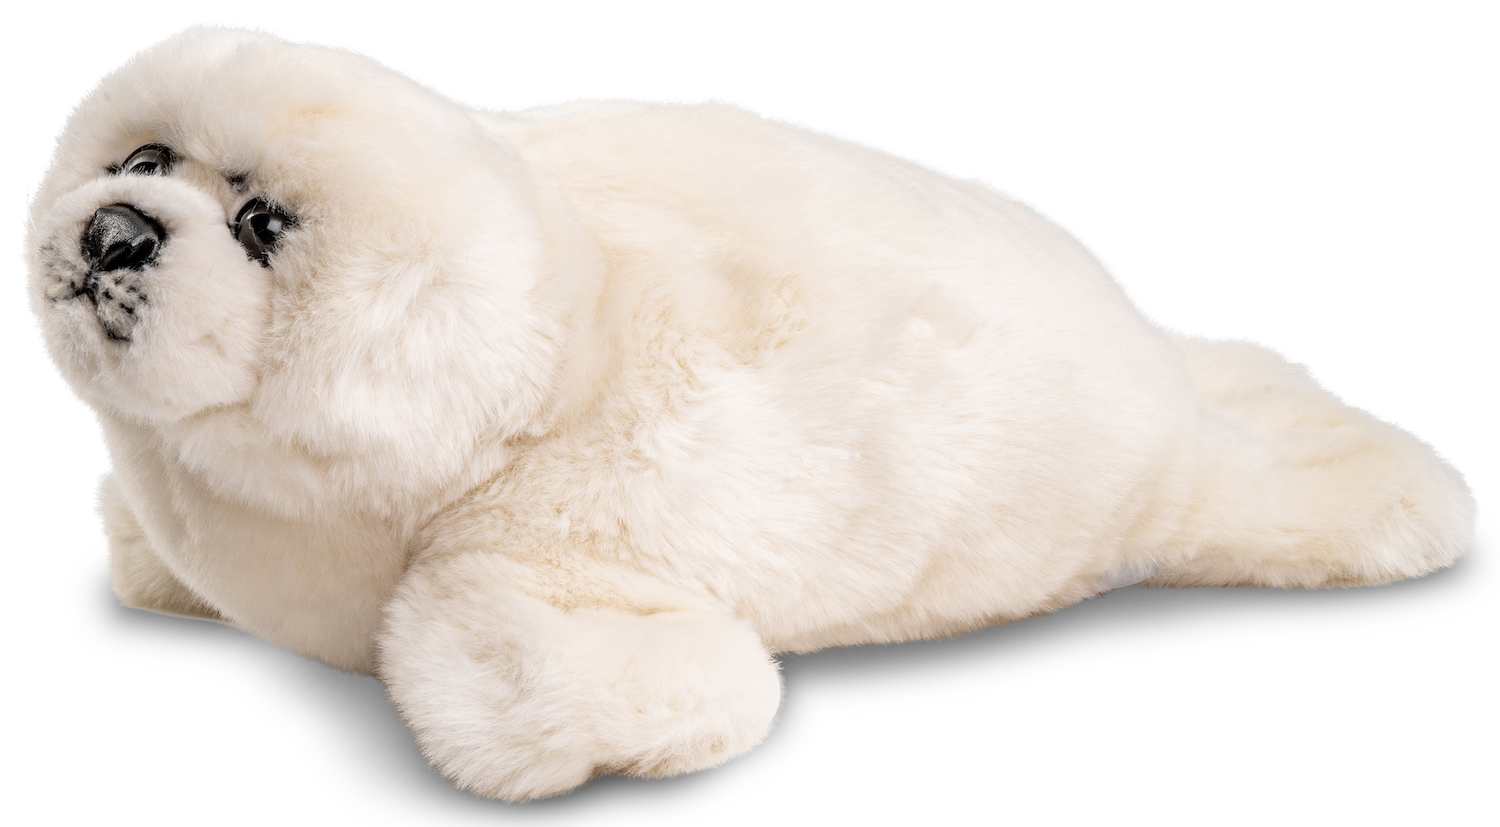 Seal White - 36 cm (length) - Plush Seal - Soft Toy, Cuddly Toy